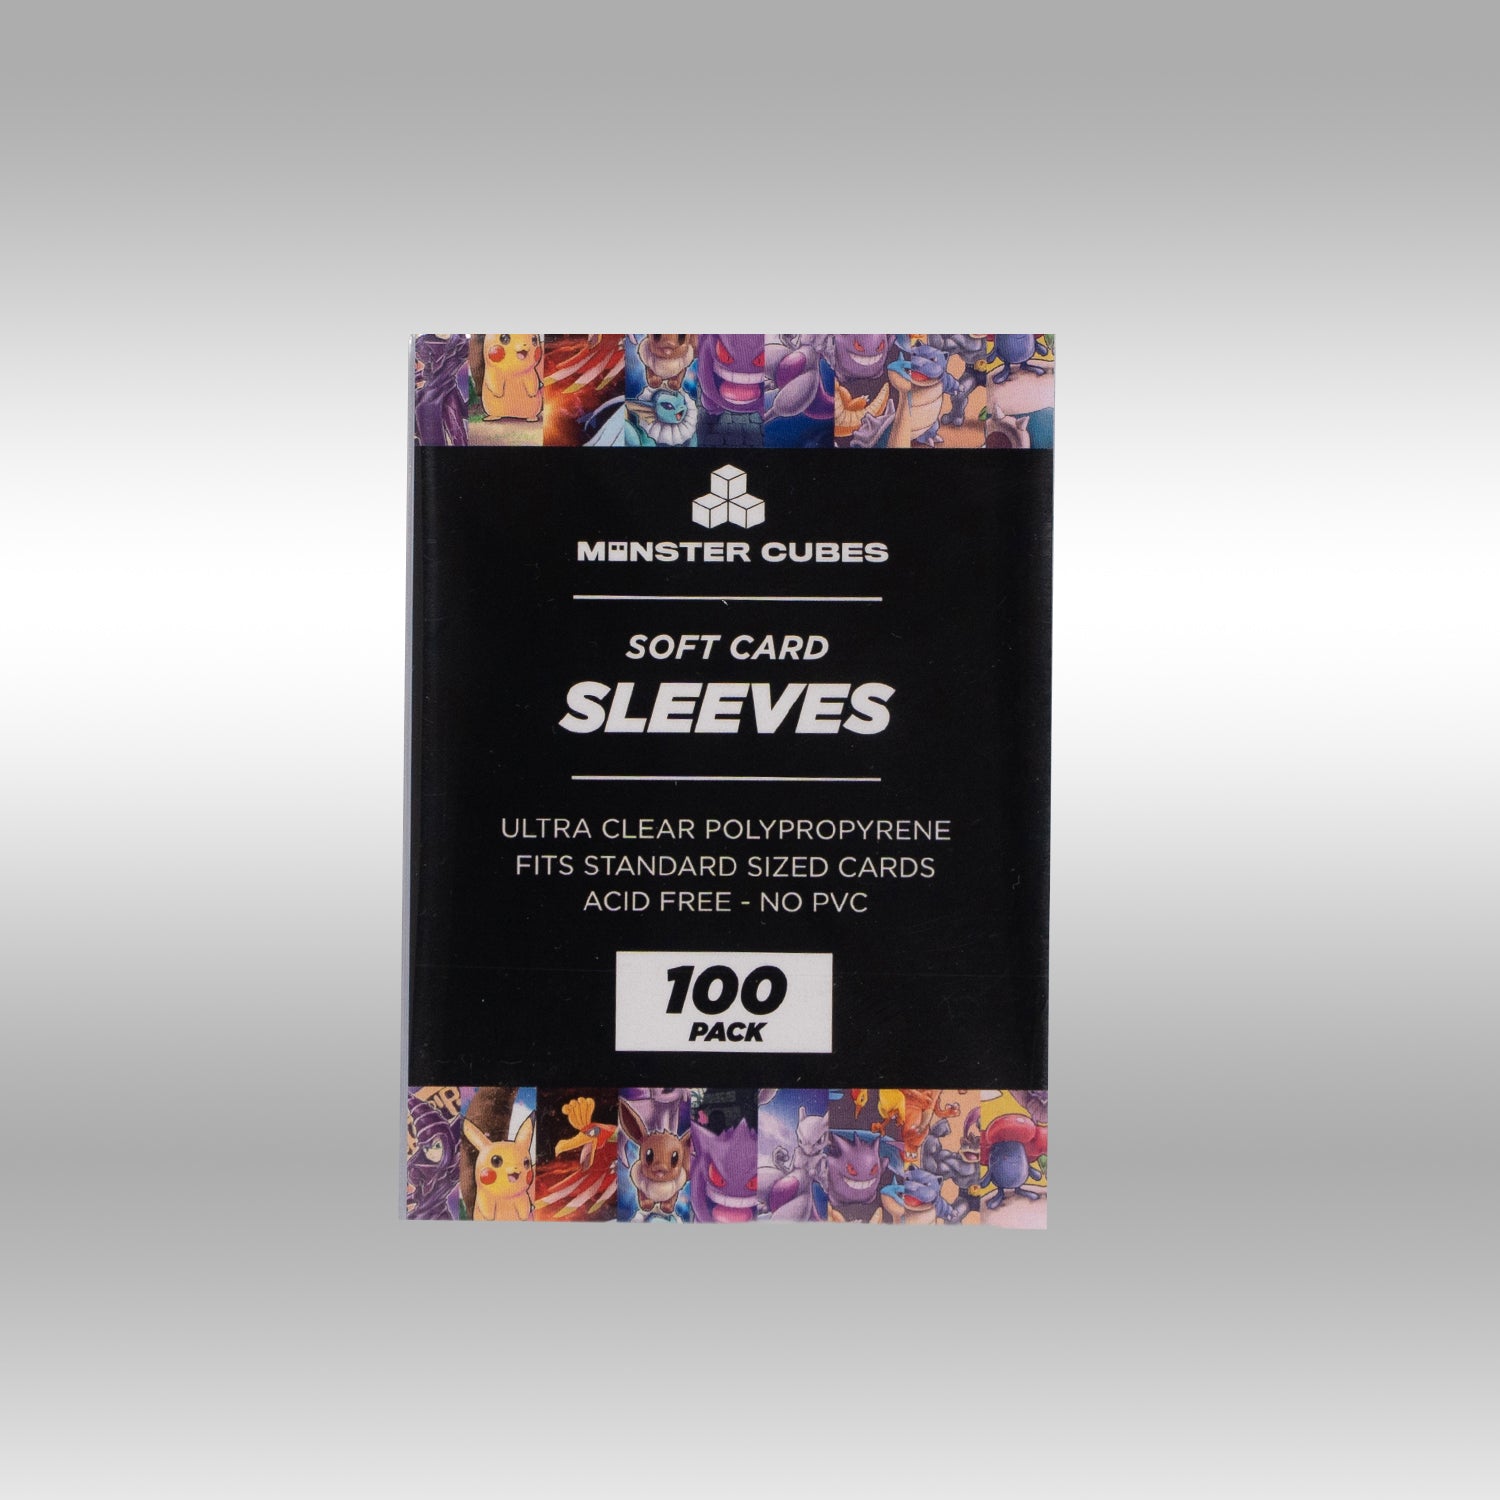 Soft Card Sleeves - 100 pack